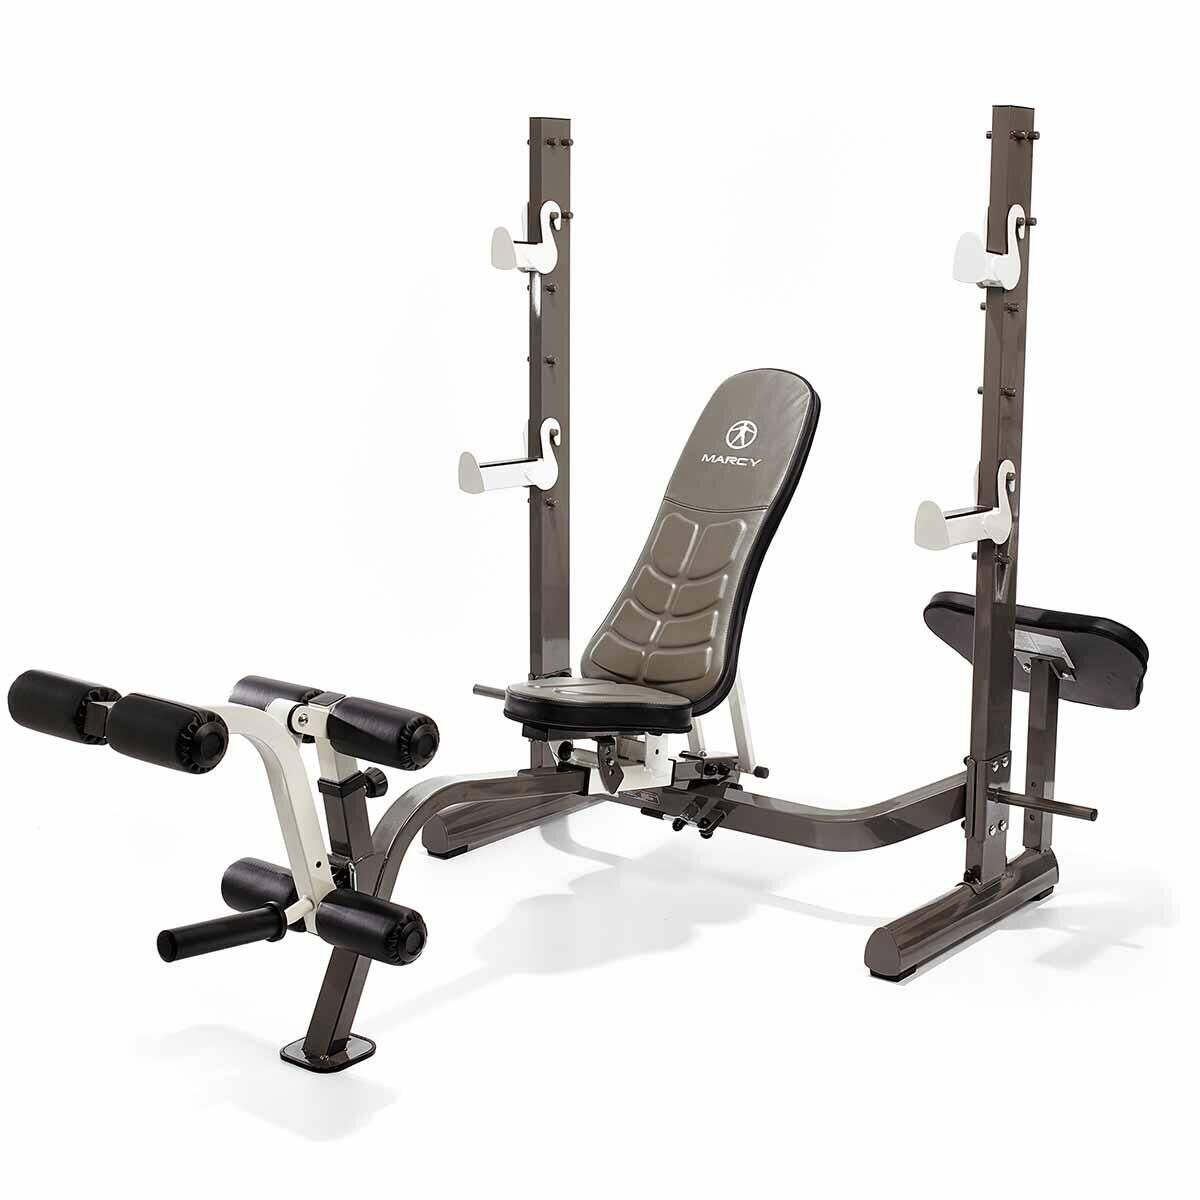 MARCY MARCY MWB-70205 FOLDING OLYMPIC BENCH WITH REAR SQUAT RACK